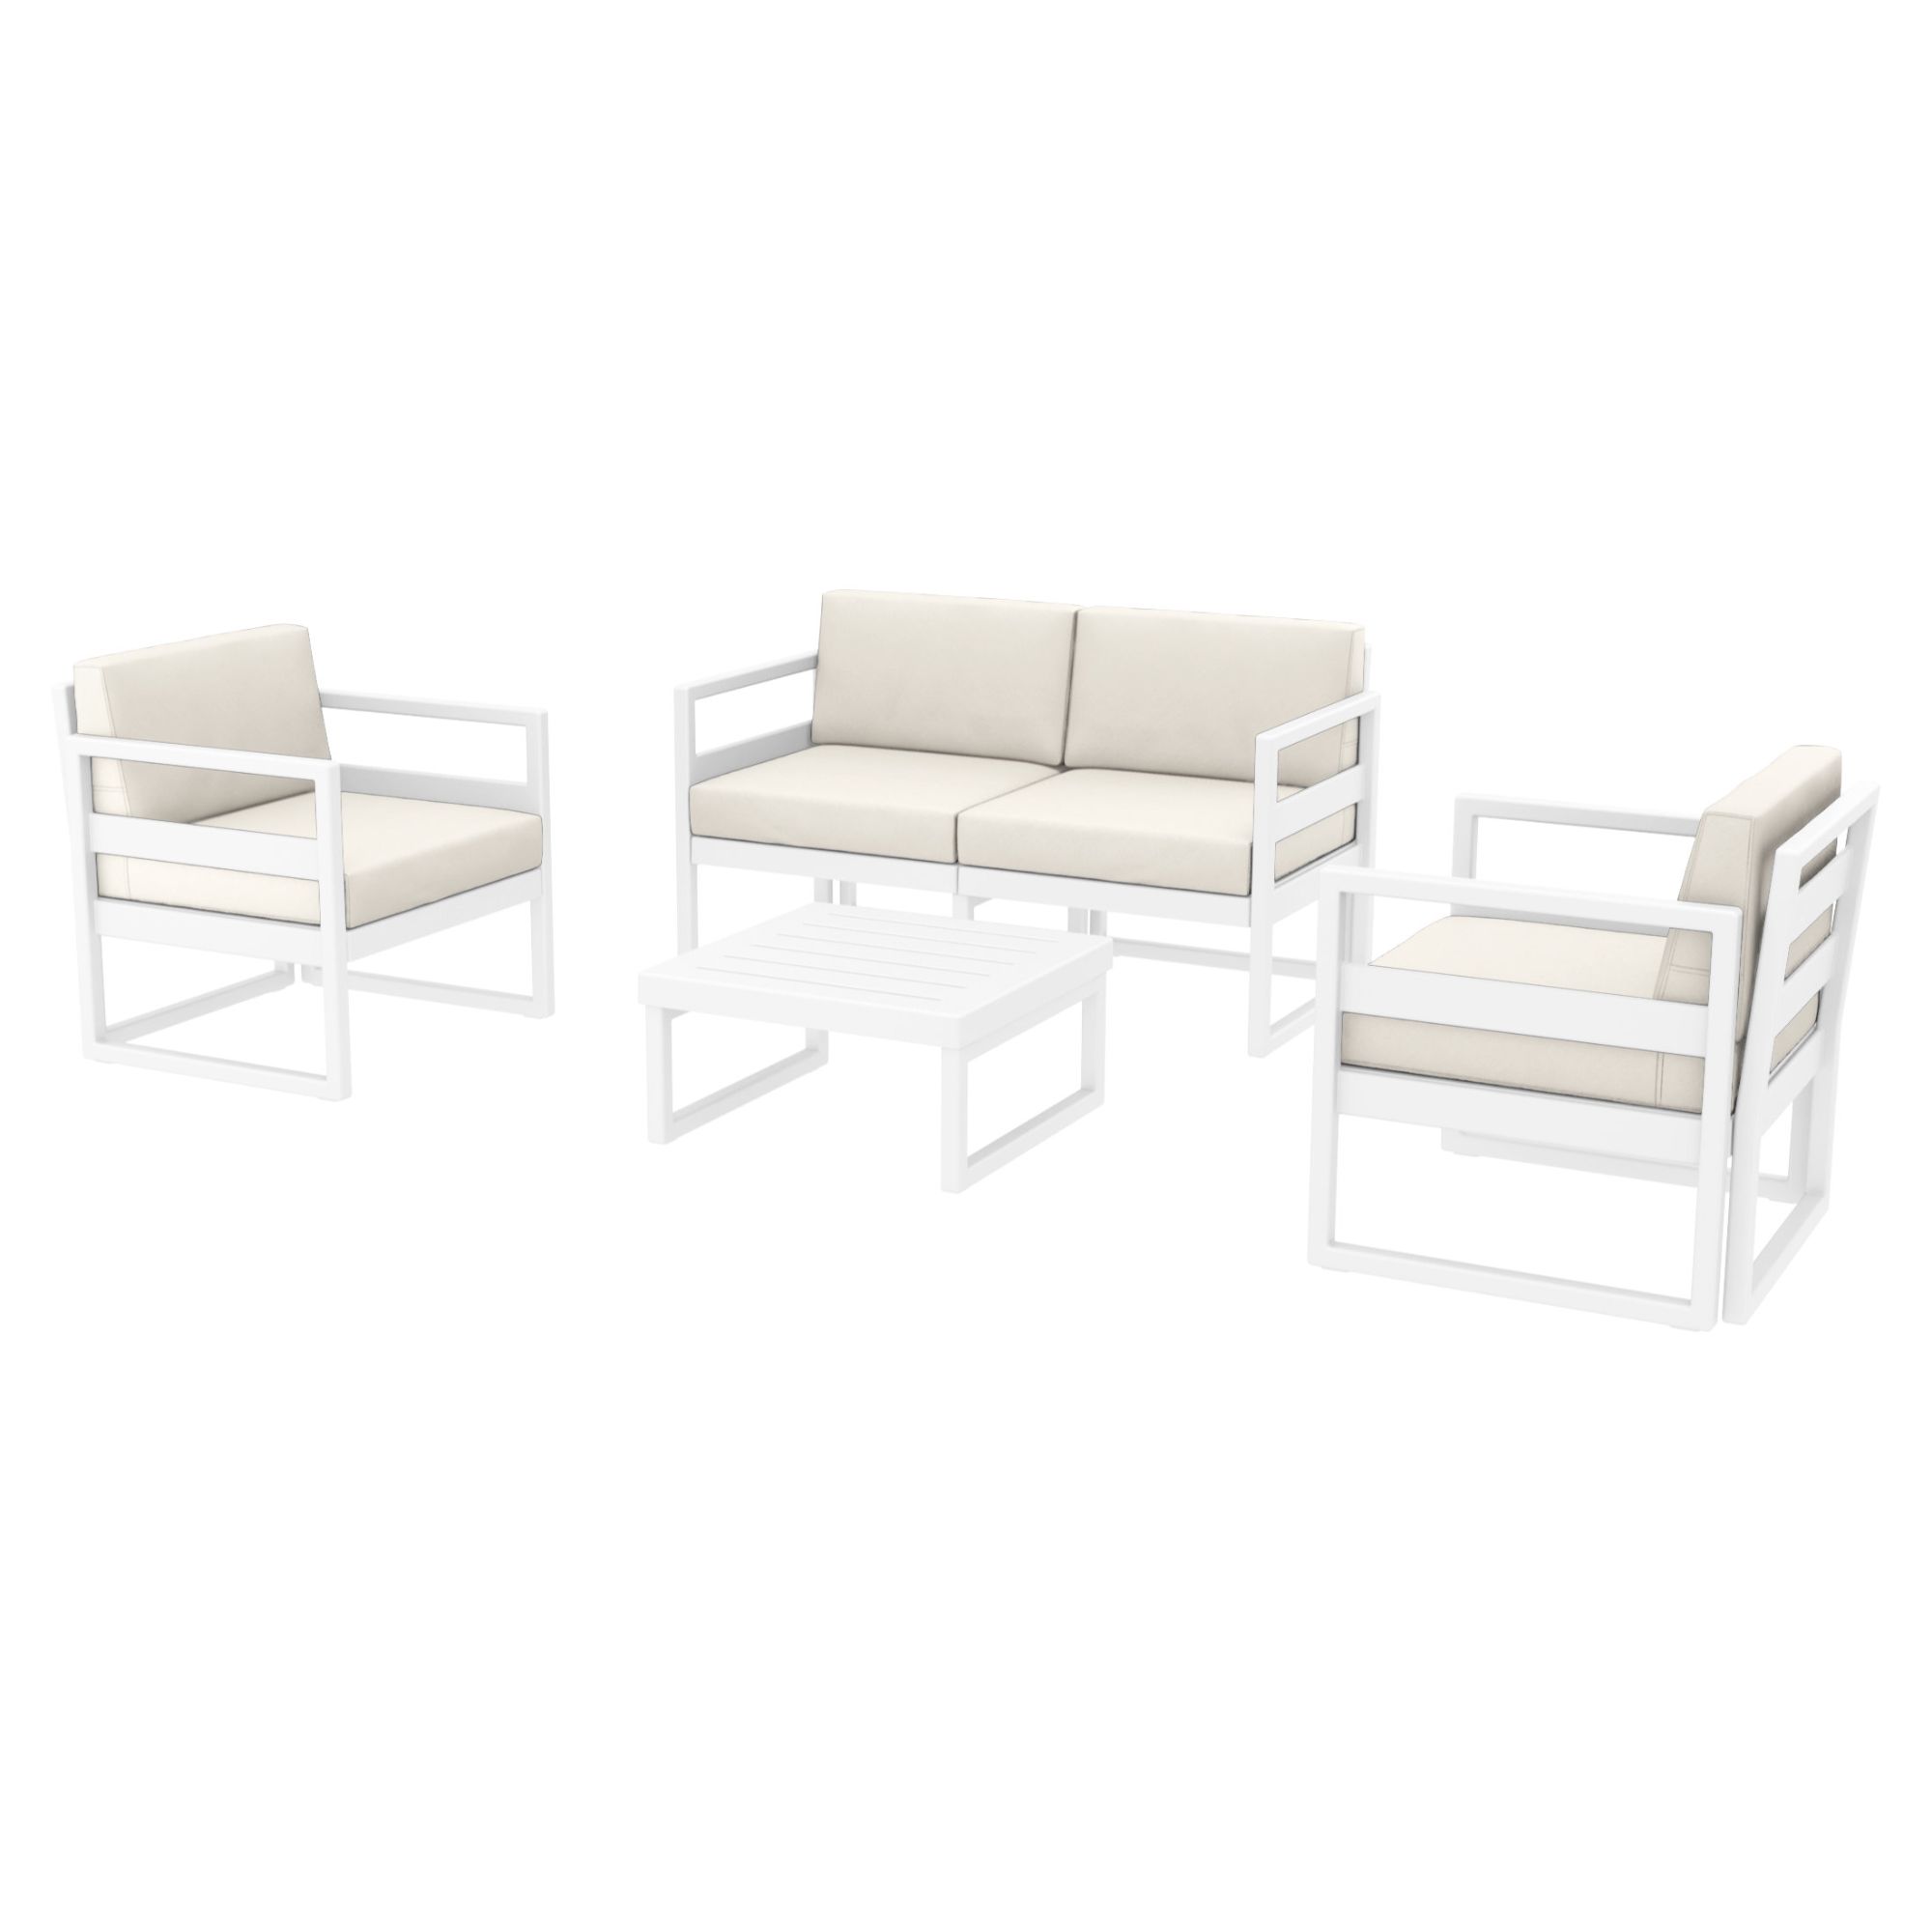 4 Piece White Outdoor Patio Lounge Set with Natural Sunbrella Cushion 54.5" - image 1 of 3